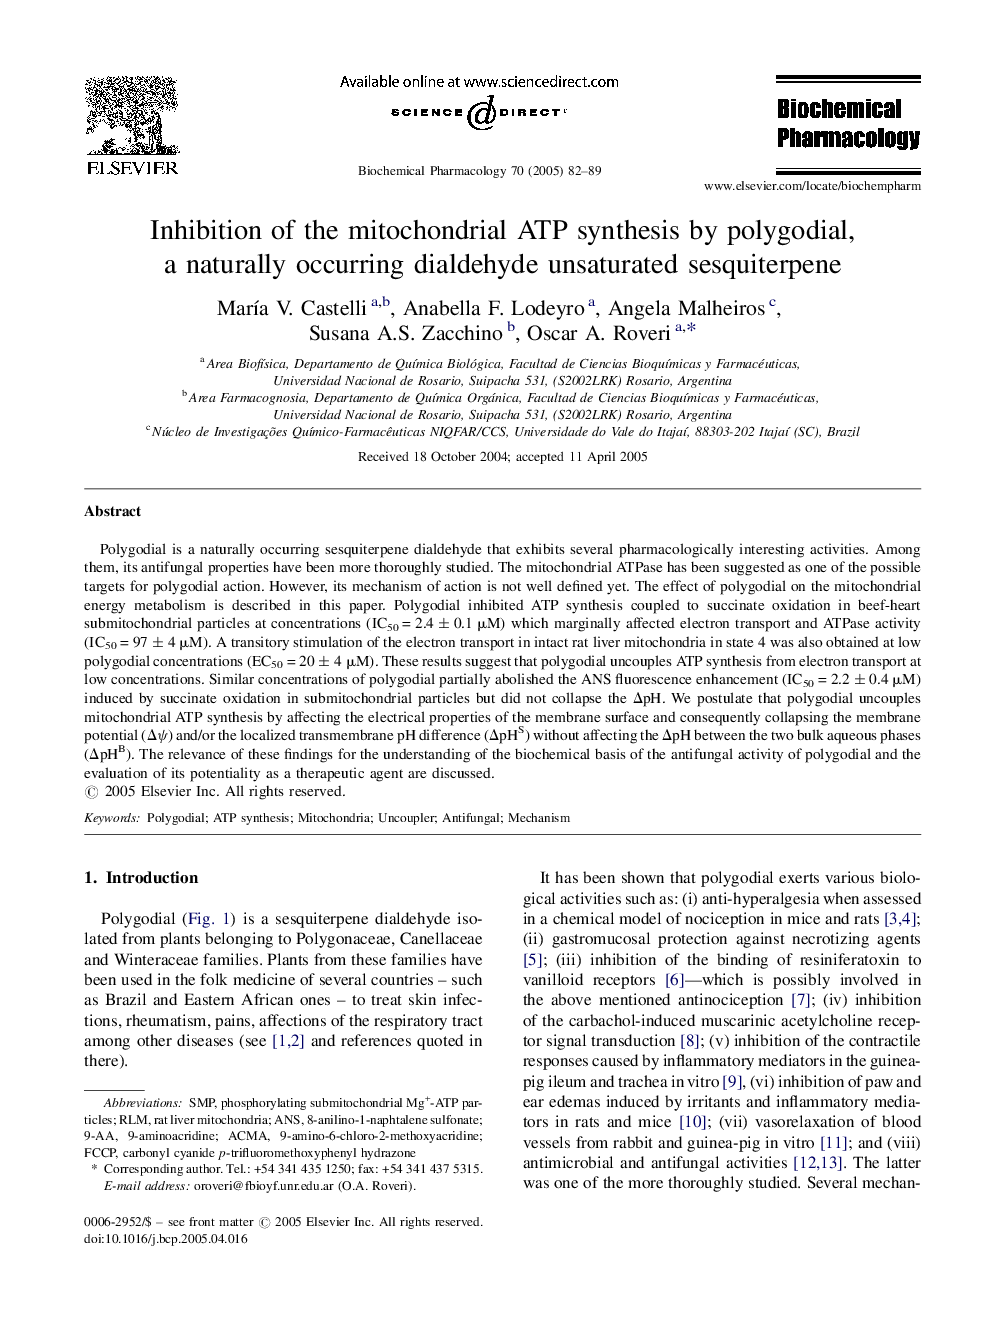 Inhibition of the mitochondrial ATP synthesis by polygodial, a naturally occurring dialdehyde unsaturated sesquiterpene